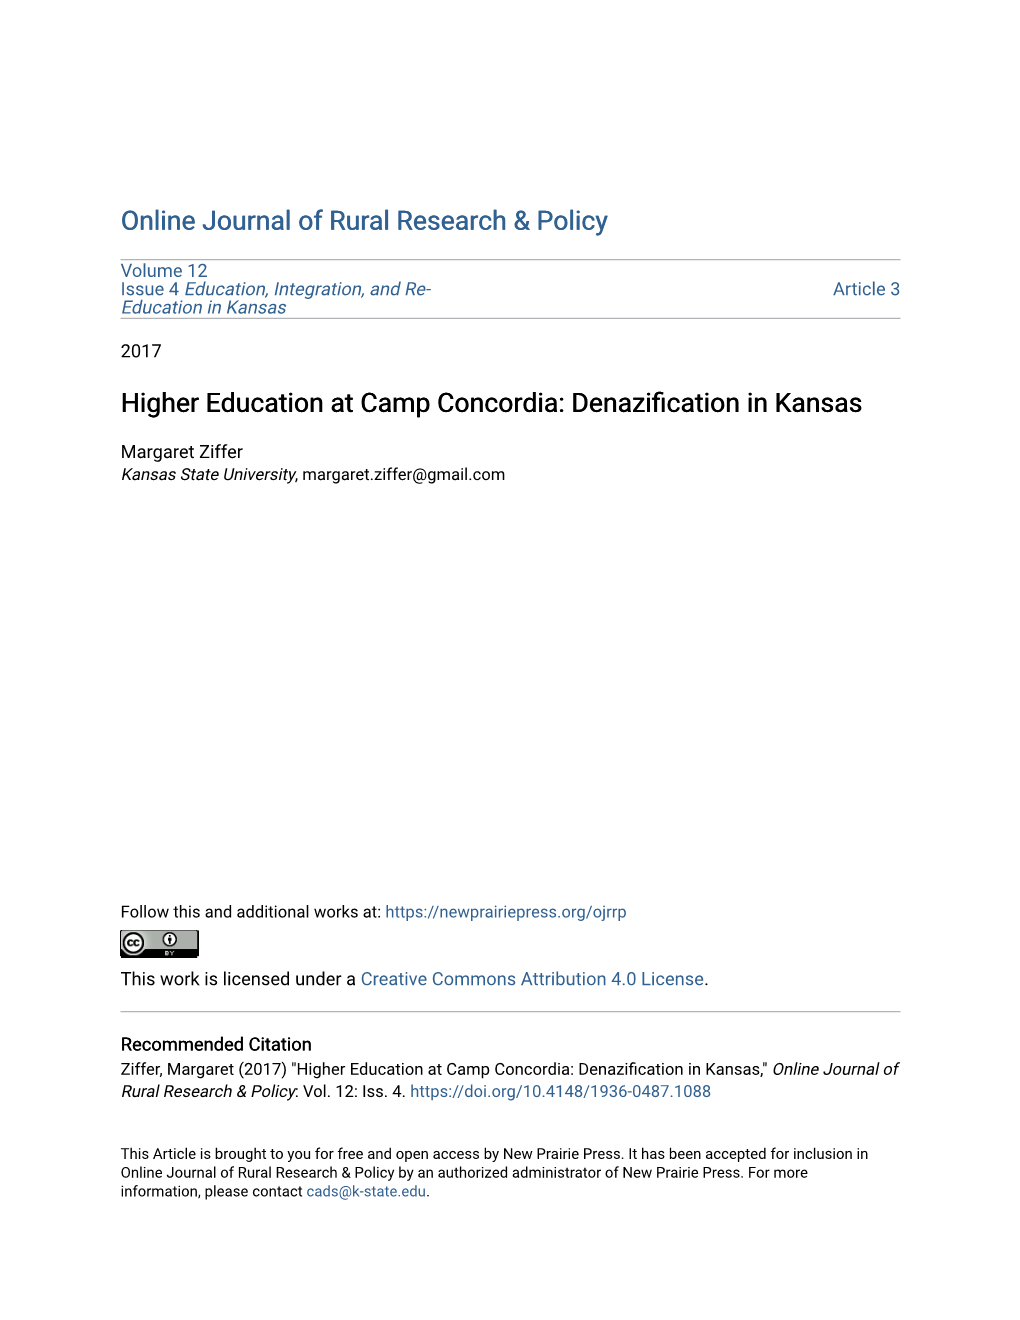 Higher Education at Camp Concordia: Denazification in Kansas